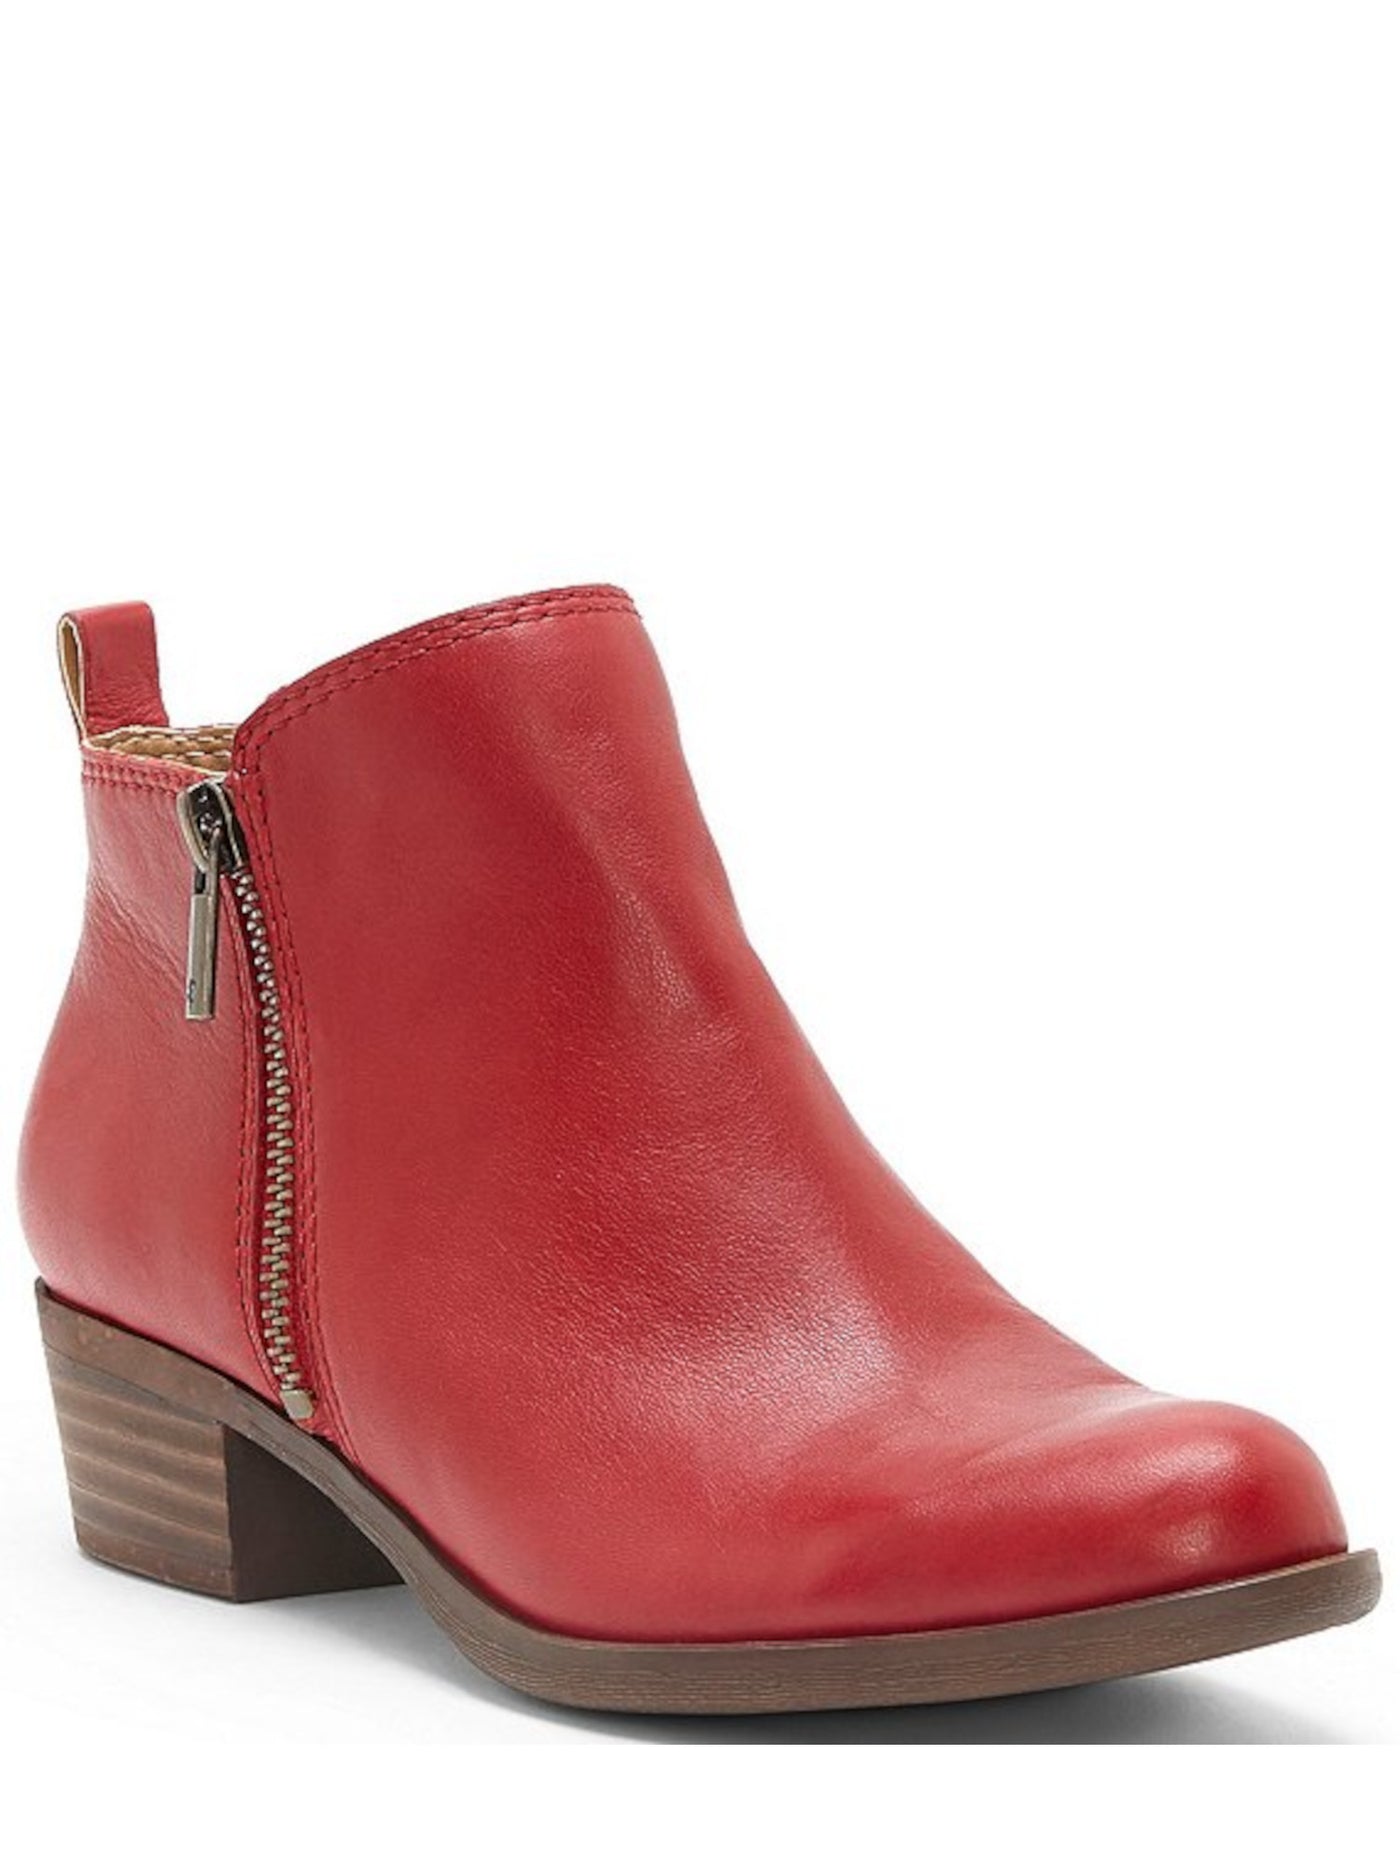 LUCKY BRAND Womens Red Pull Tab Cushioned Basel Round Toe Block Heel Leather Booties 8 M